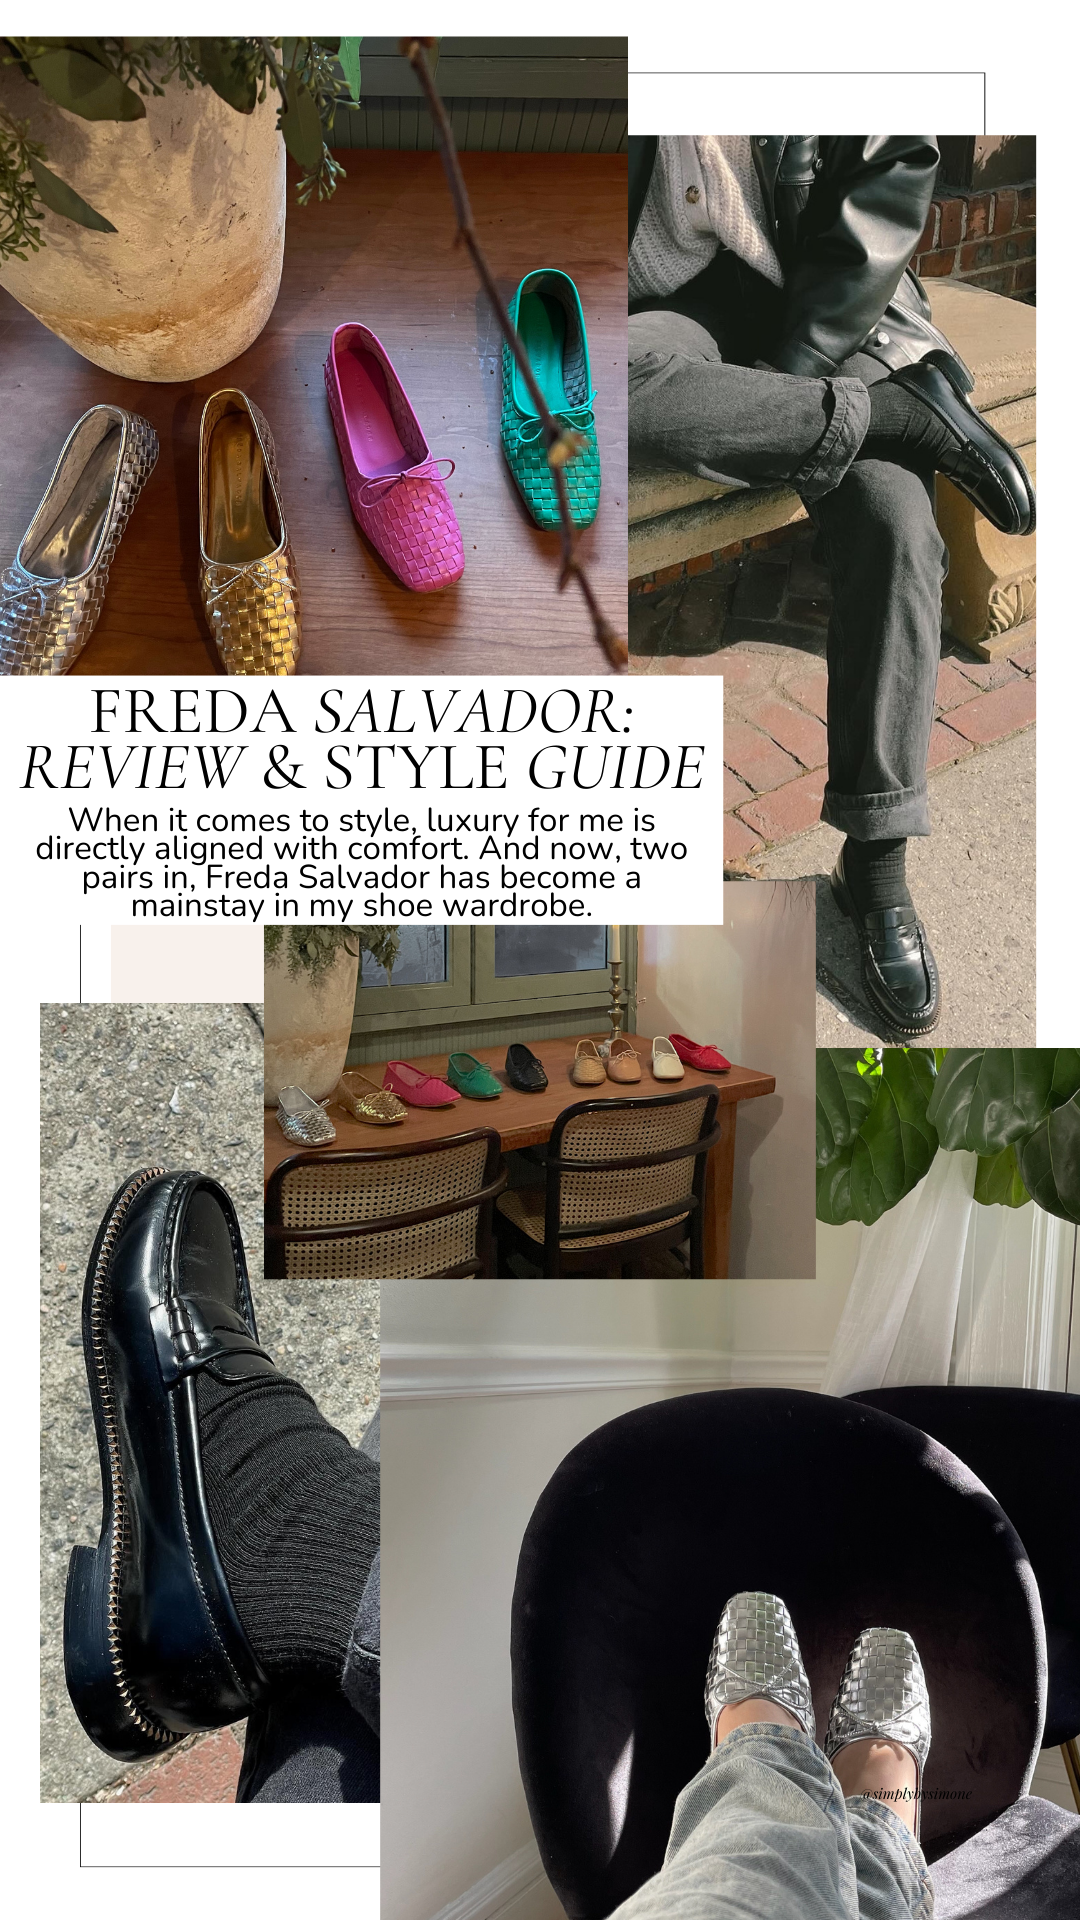 Freda Salvador Shoe Review & Style Guide Collage of Shoes, Outfits and Shoe Closeups 